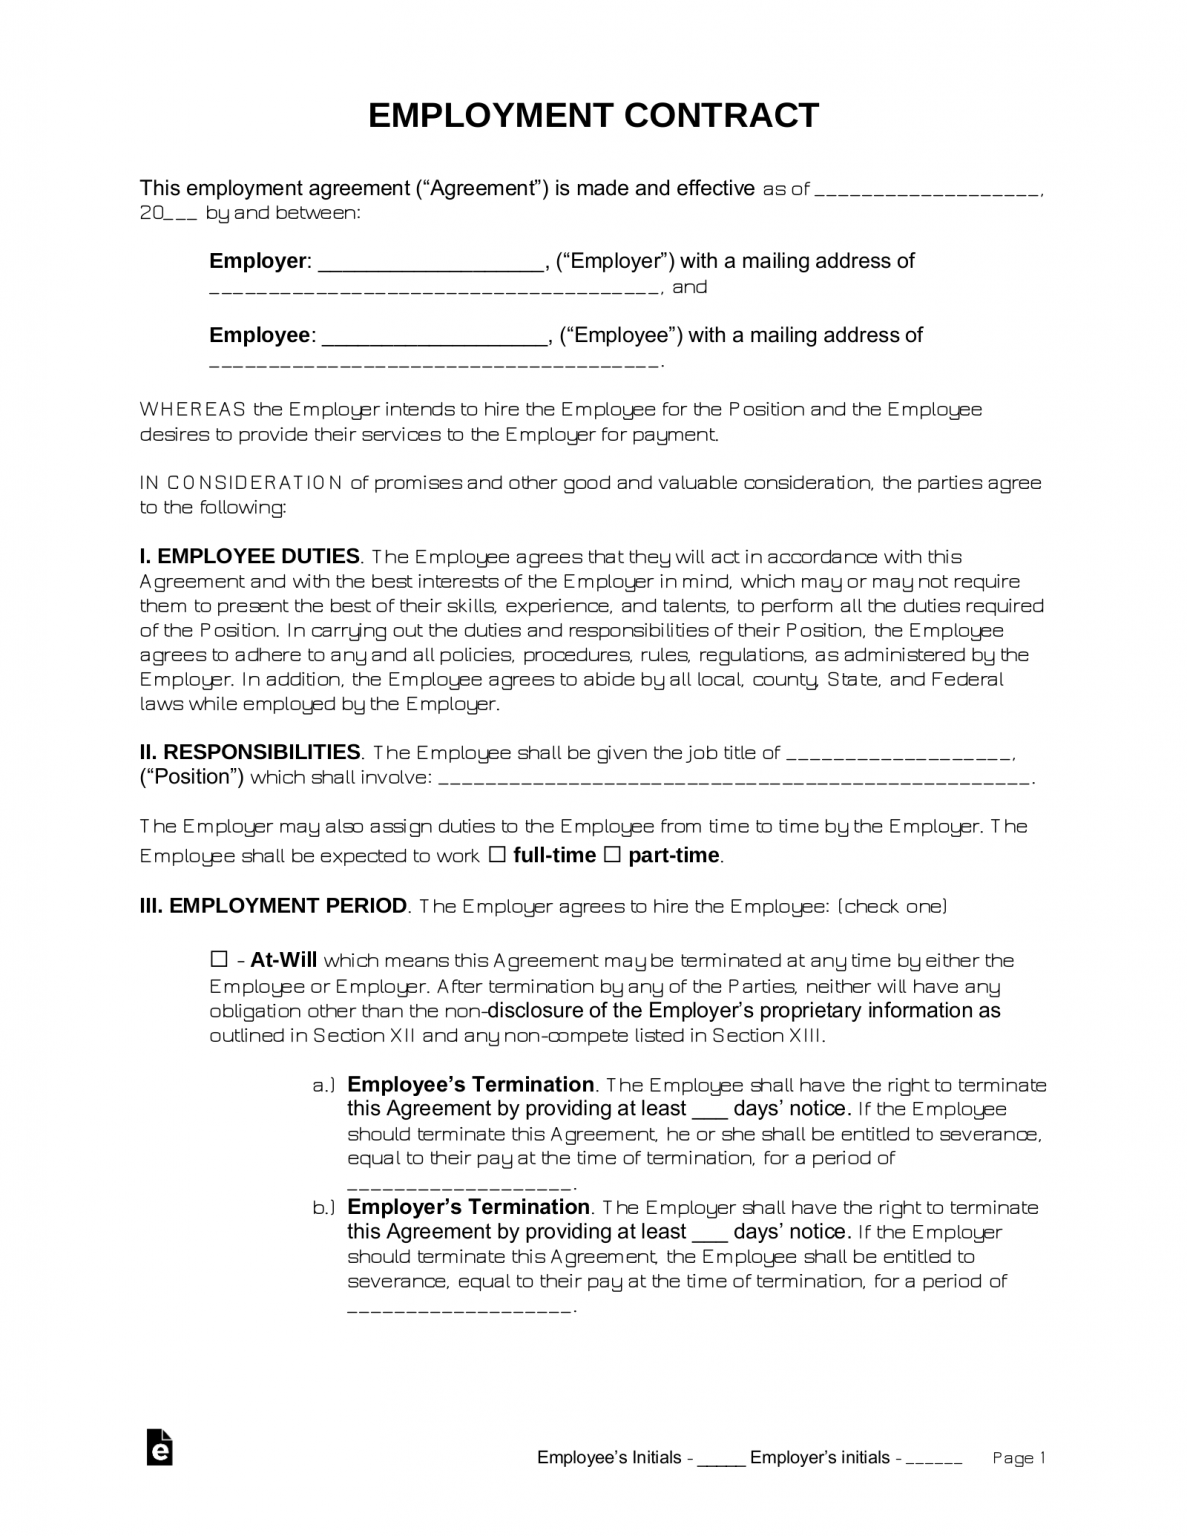 free-employment-contract-templates-pdf-word-eforms